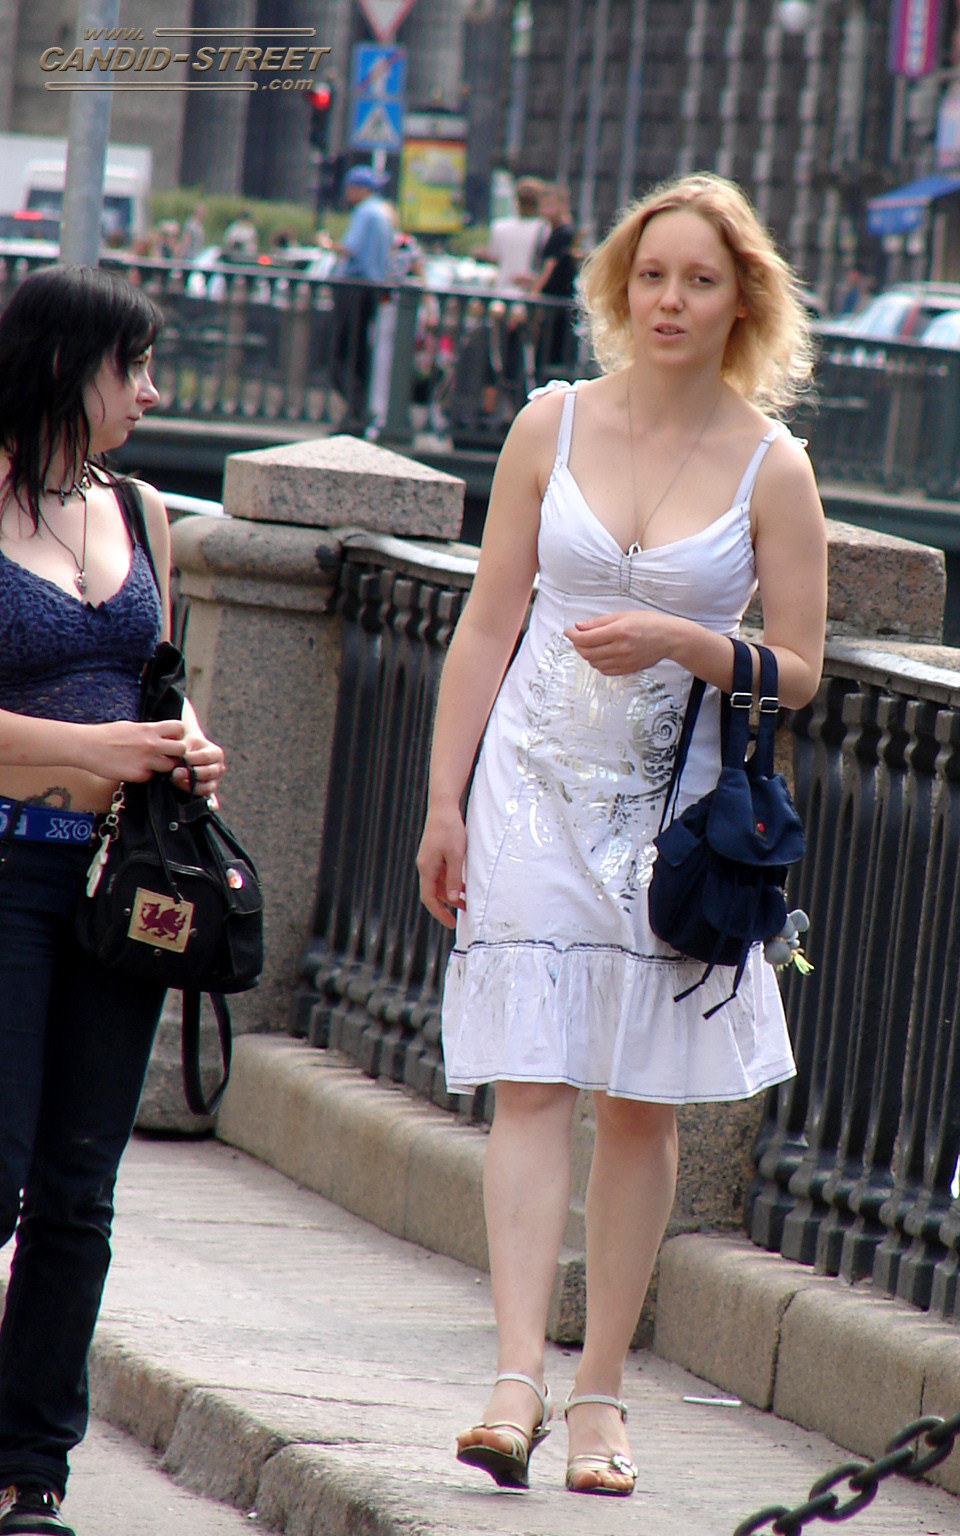 Busty girls candid shots - 22-dsc06957 from Candid Street